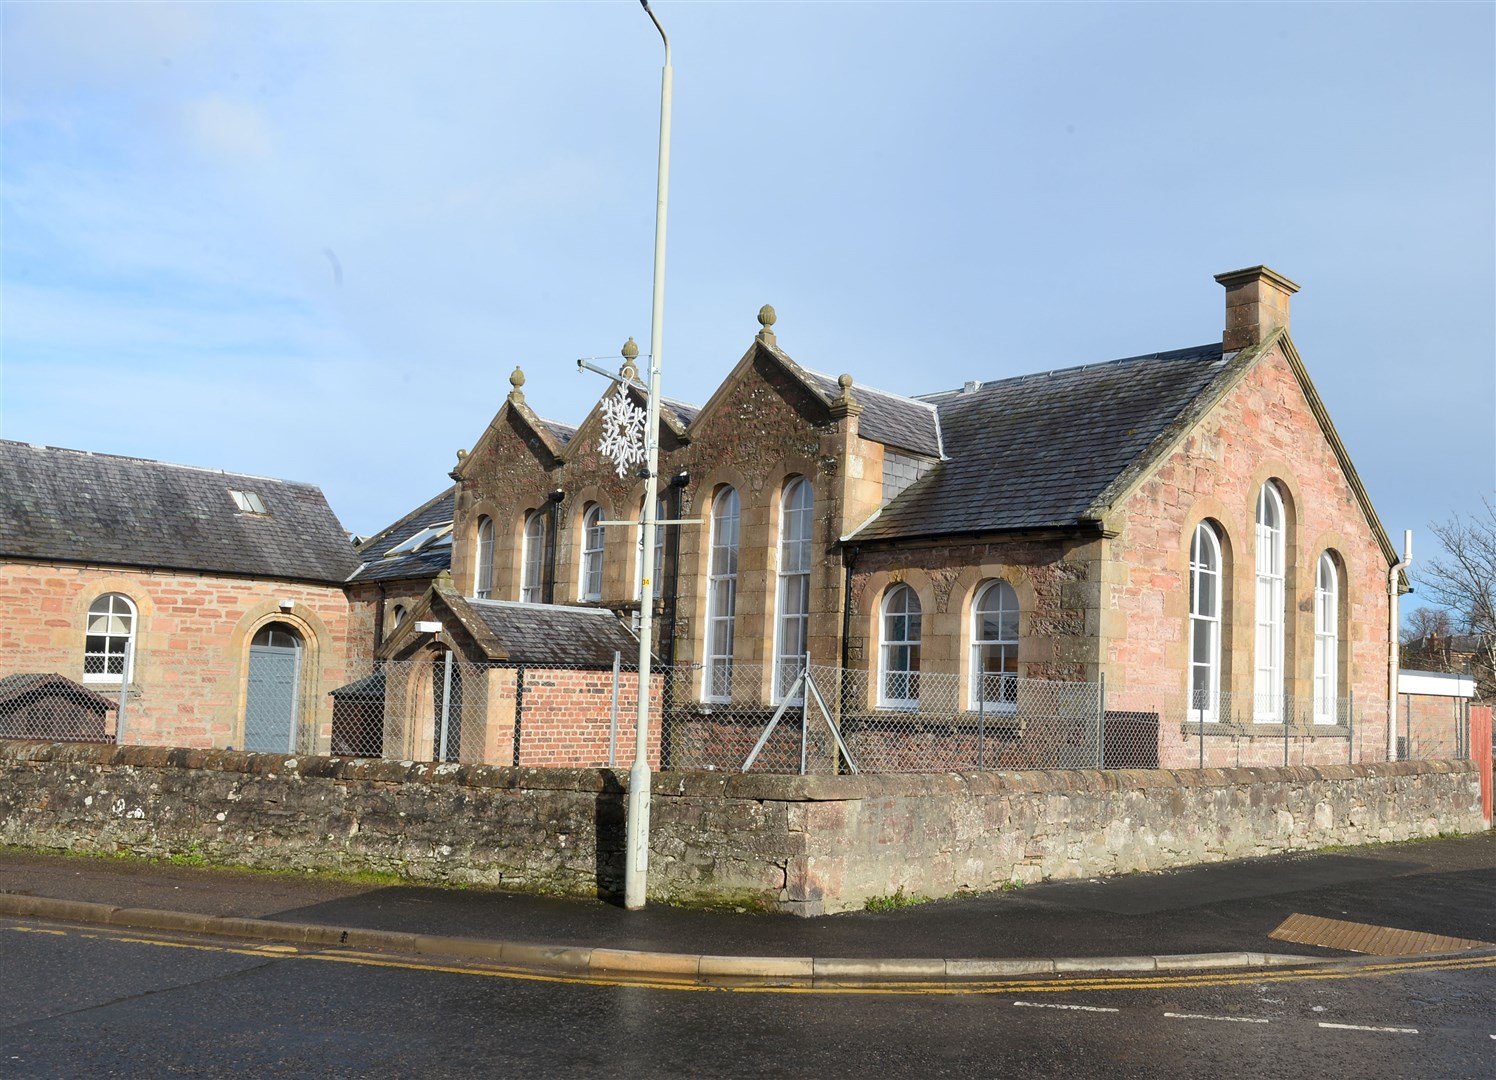 St Clement's School in Dingwall has been the subject of decades of campaigning to secure a replacement..